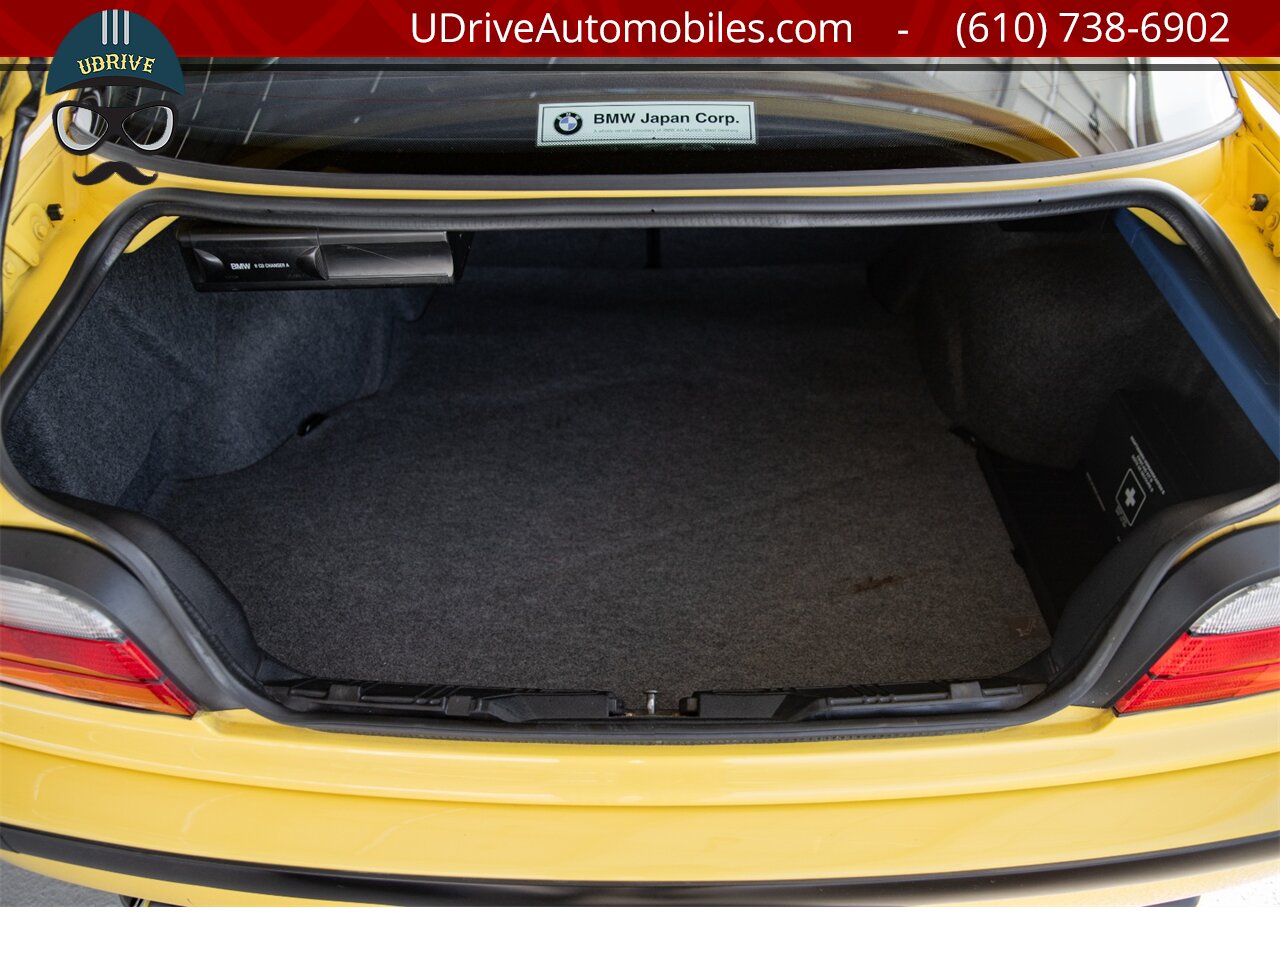 1994 BMW M3 Euro E36 M3 Dakar Yellow Rain Cloth Seats 5 Speed  Over $12k in Recent Service - Photo 44 - West Chester, PA 19382